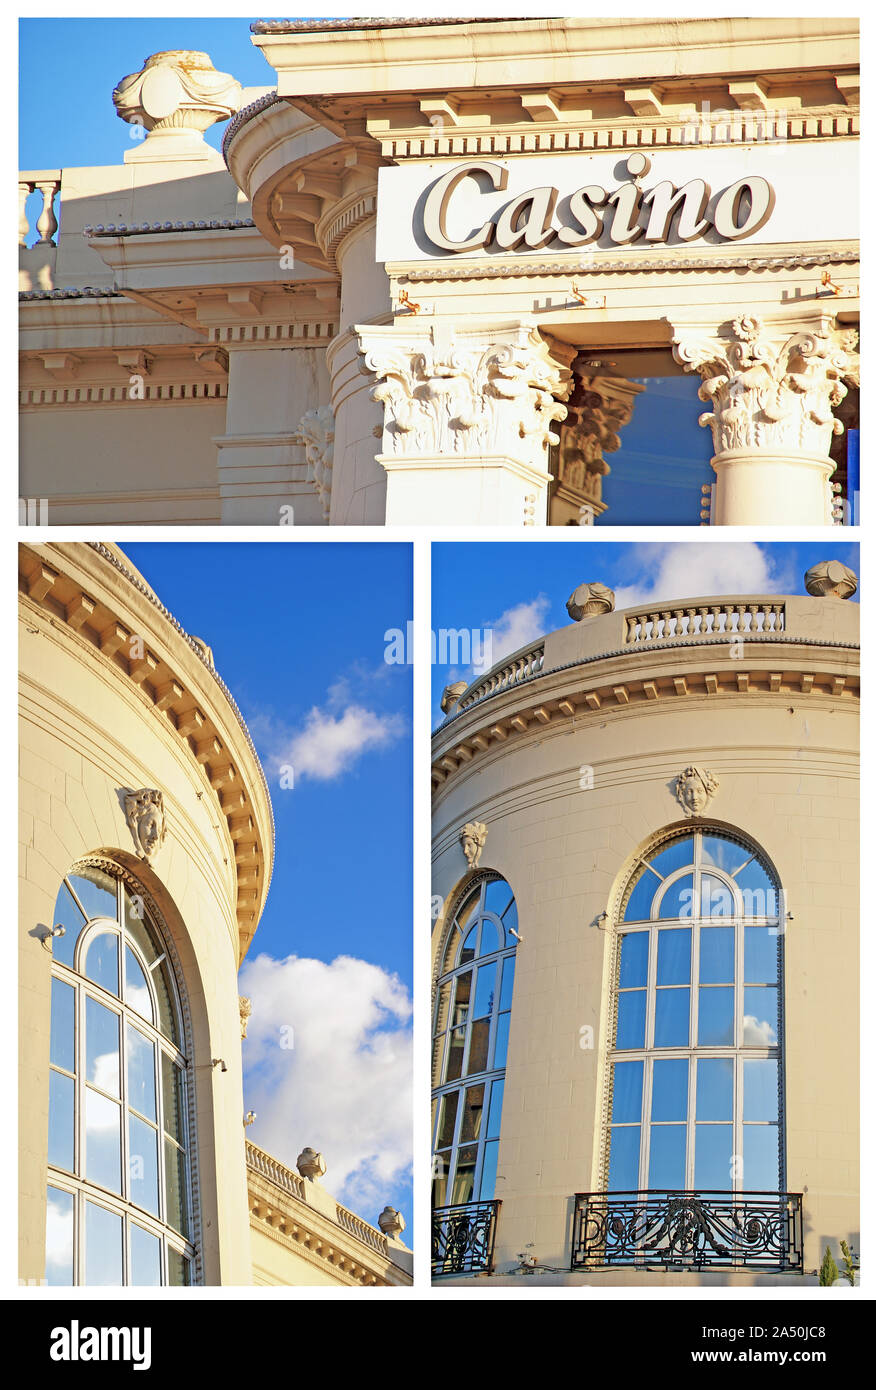 Exterior views in detail of a casino building. Stock Photo